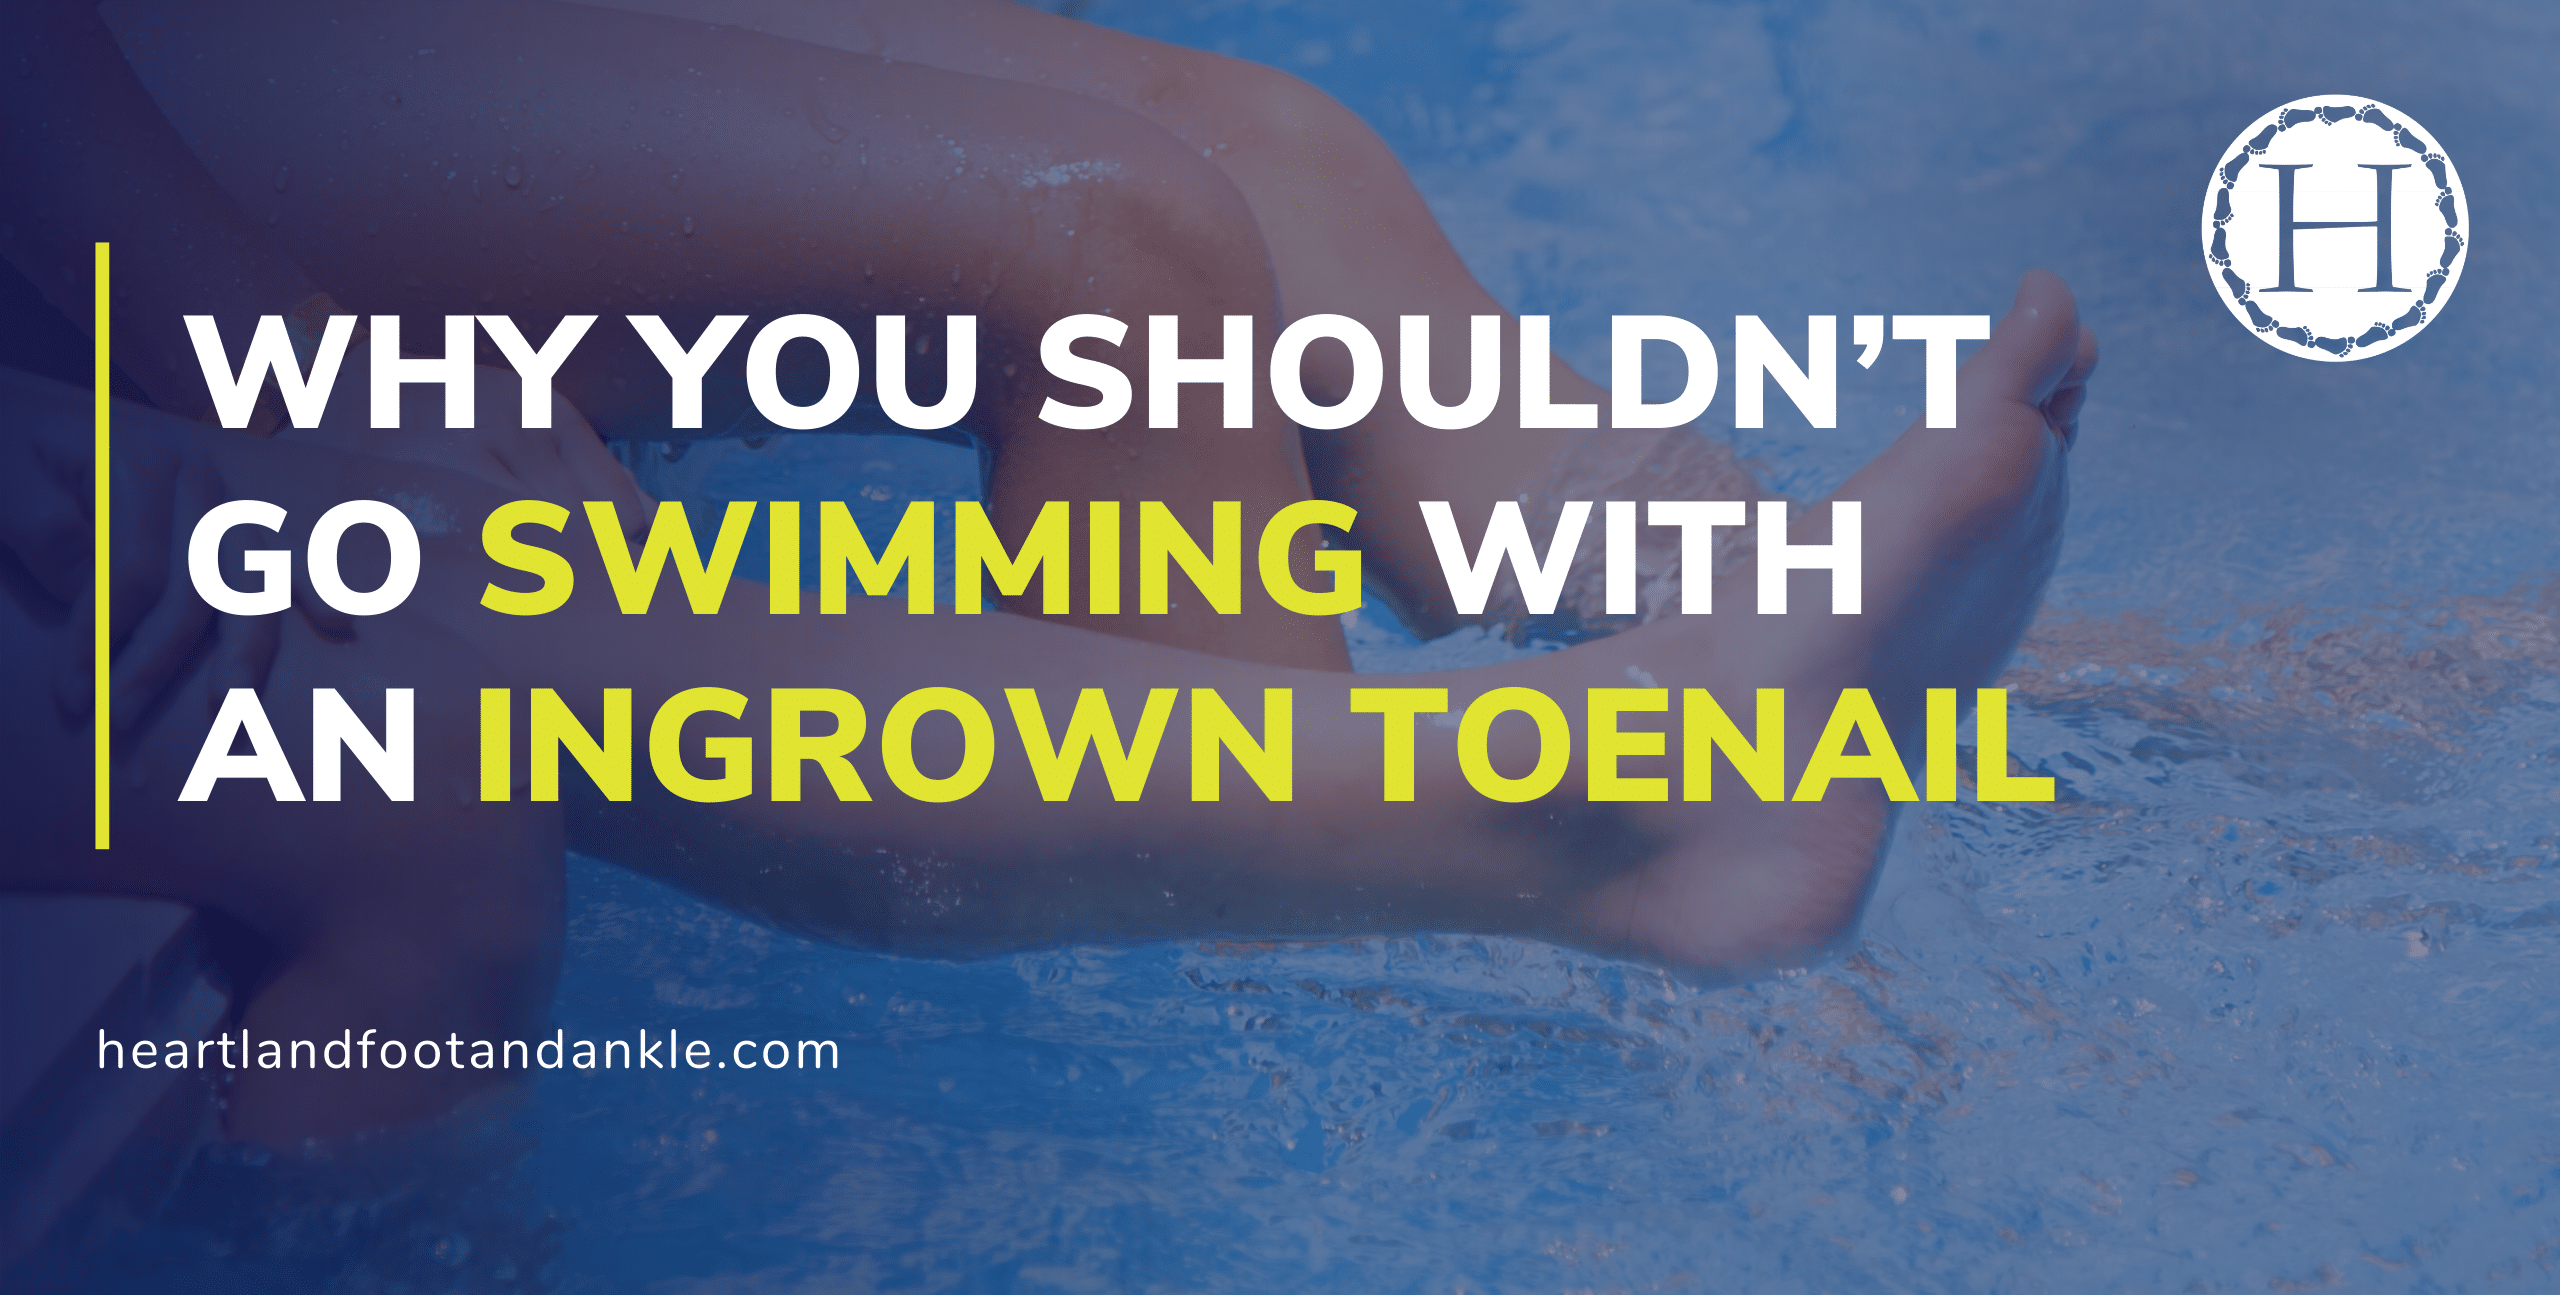 Don't go swimming with an ingrown toenail